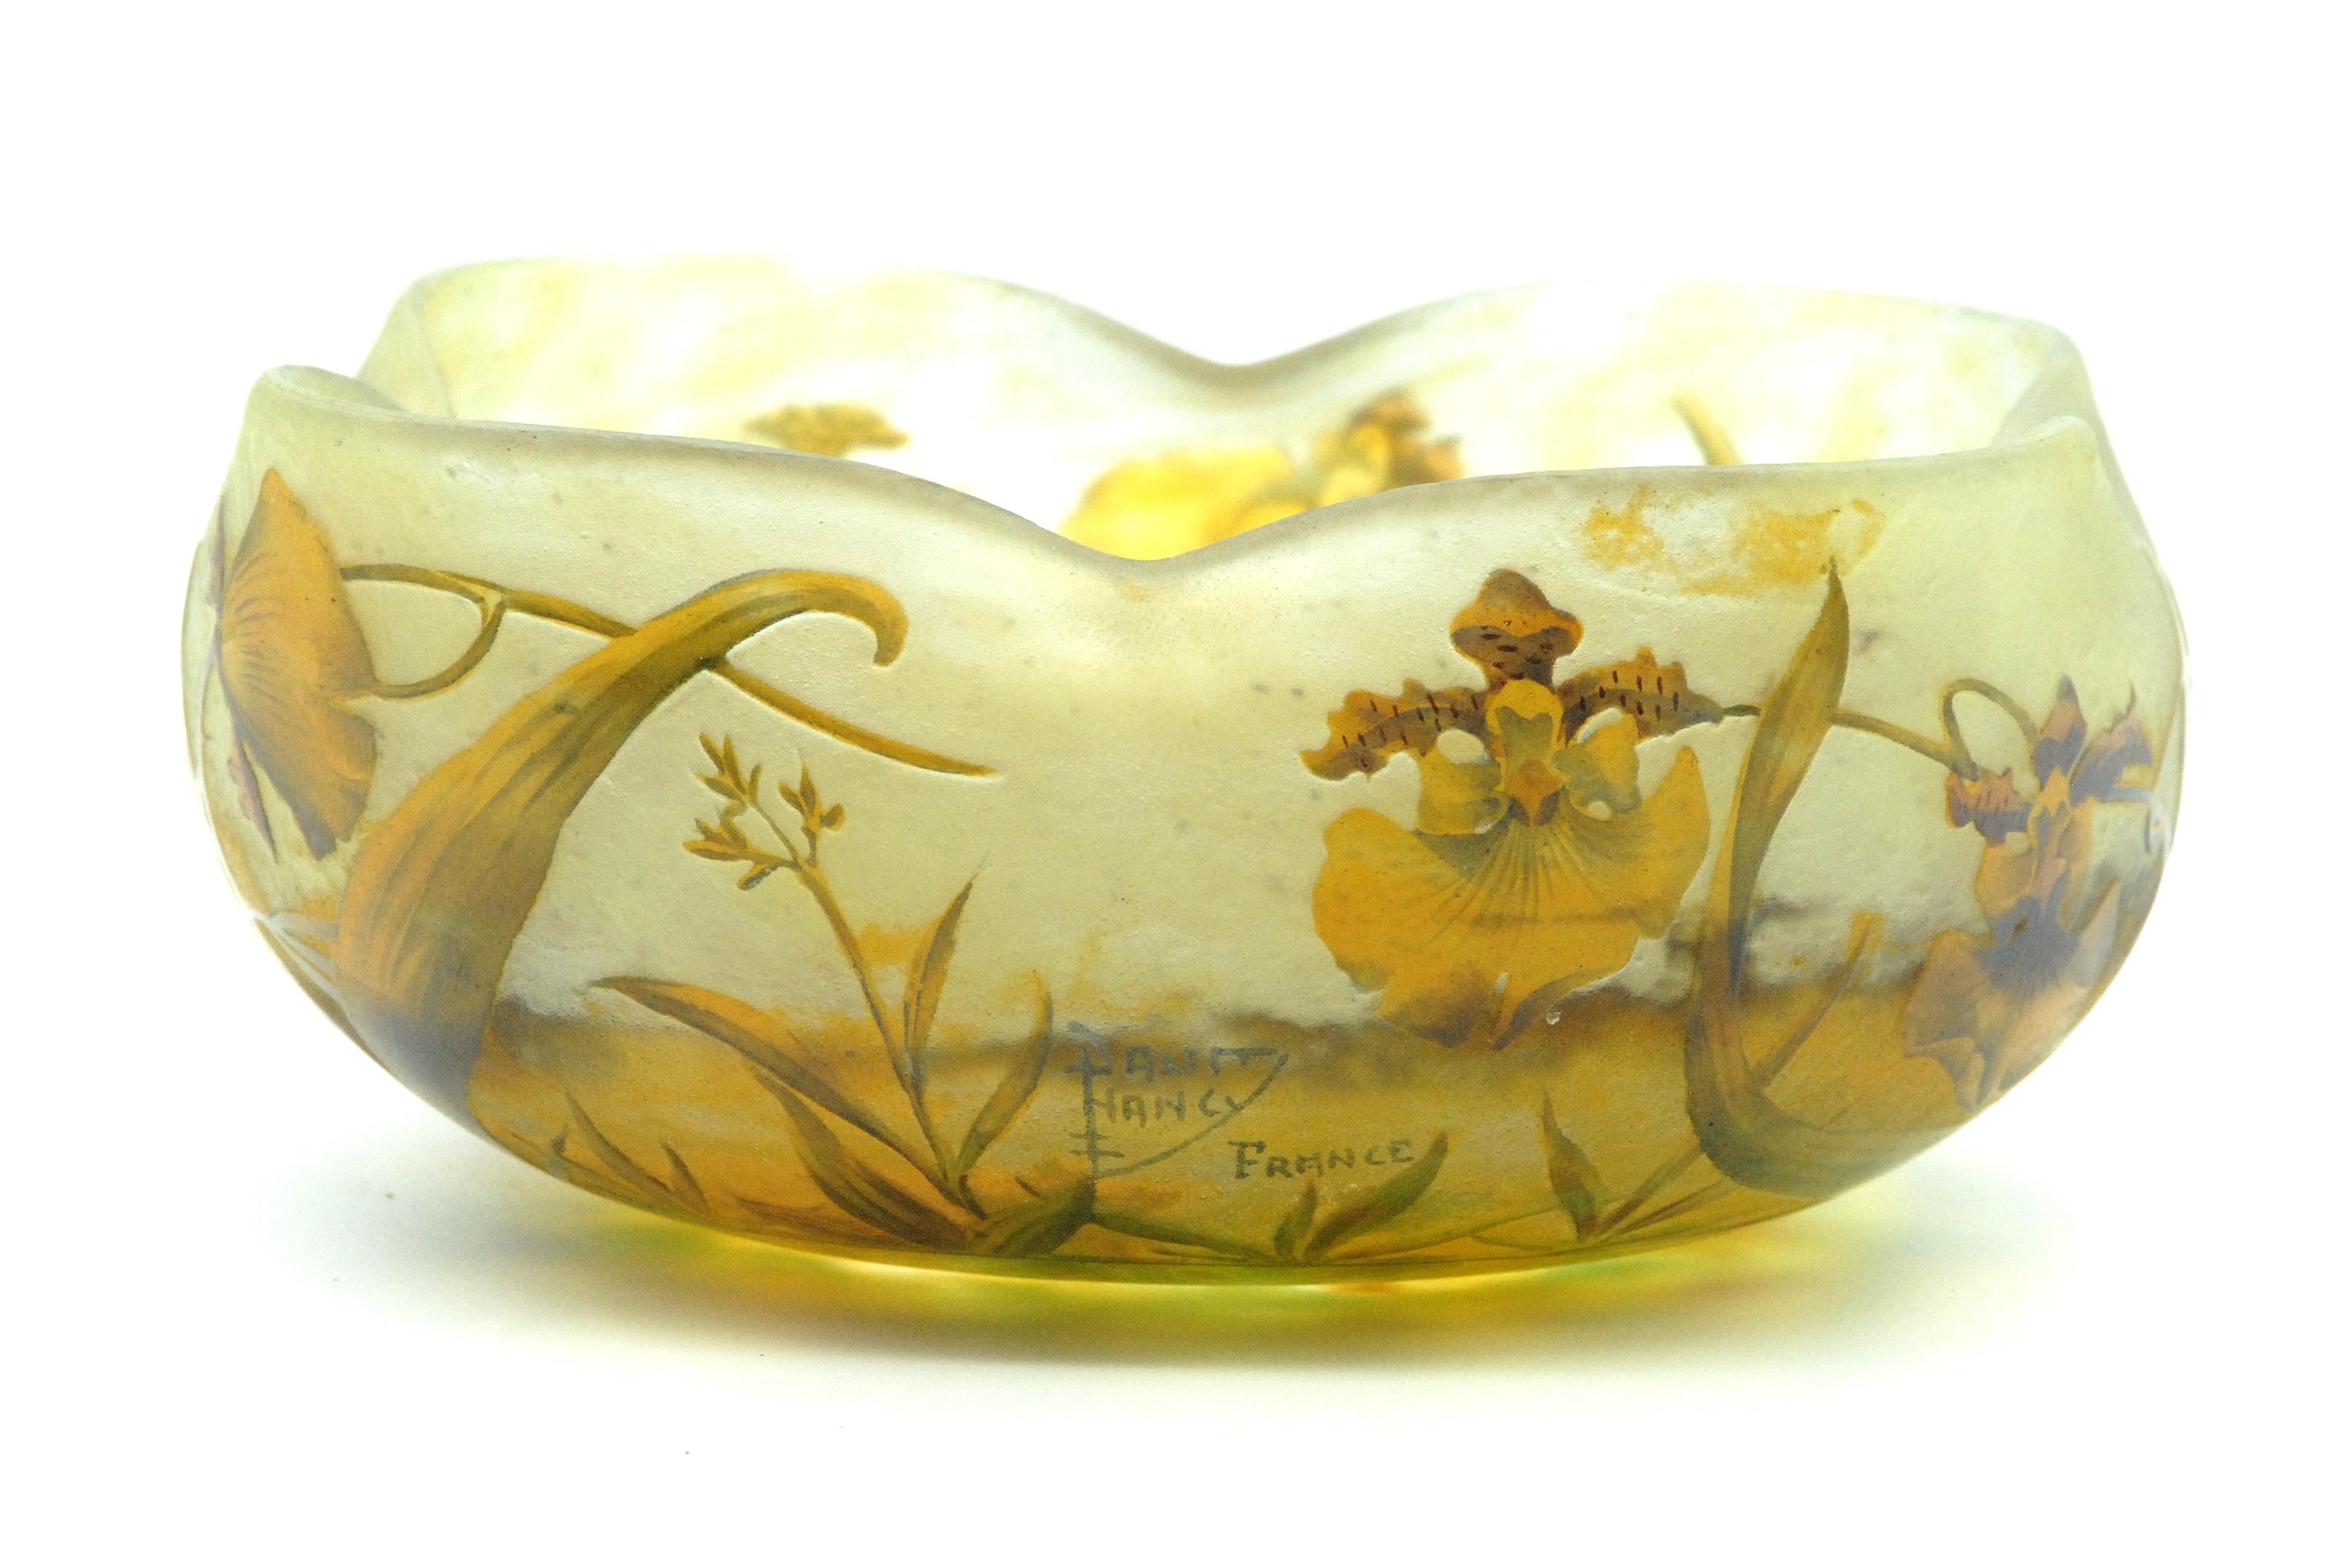 Yellow orchids are in bloom on this rare cameo art glass bowl by the renowned French glass making firm of Daum, Nancy. The graceful vessel features a wavy-edged rim and delicate, wistful flowers residing upon a sunset background of yellow. Unique,